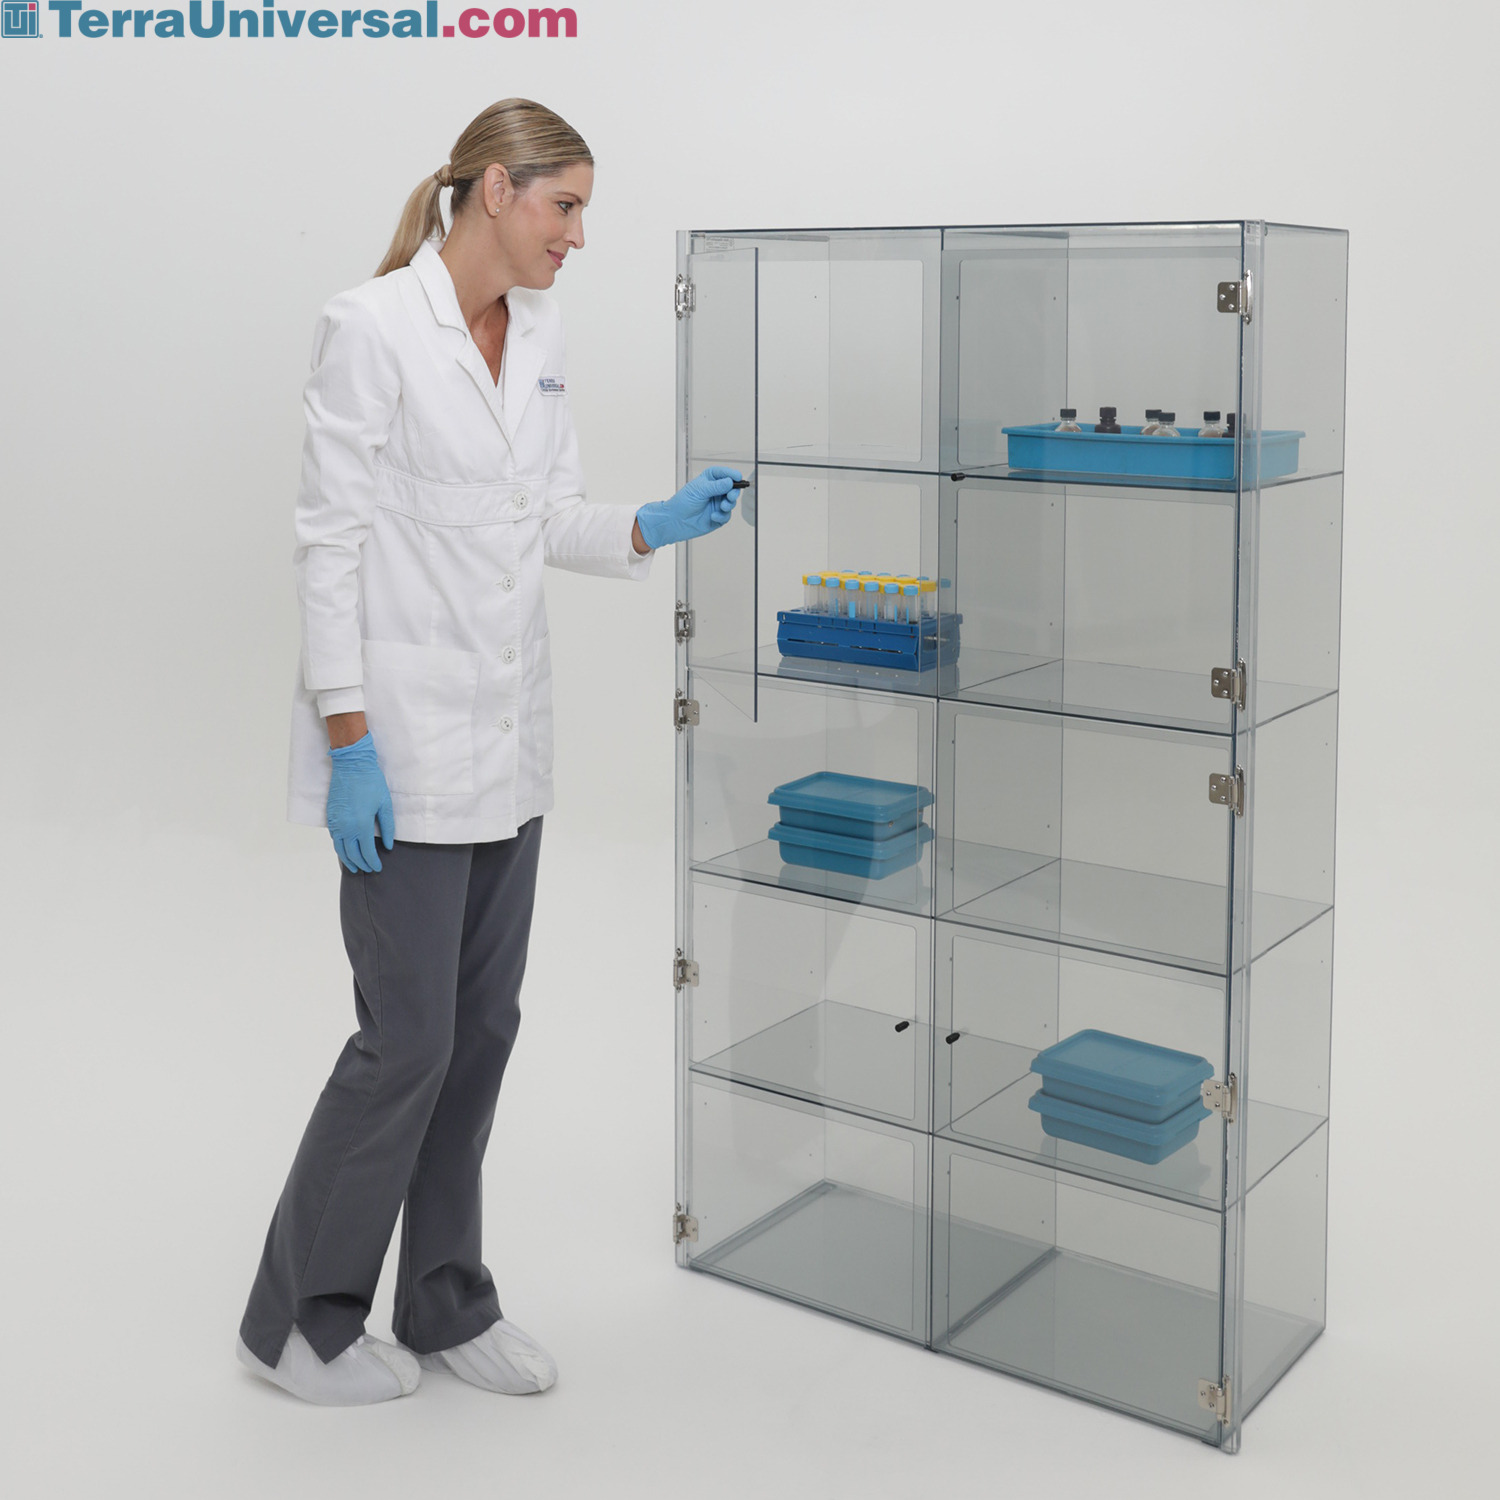 https://www.terrauniversal.com/media/asset-library/cache/original/watermark_c/1/l/a/large-plastic-cleanroom-storage-cabinet-esd-safe-10-chamber-model.jpg